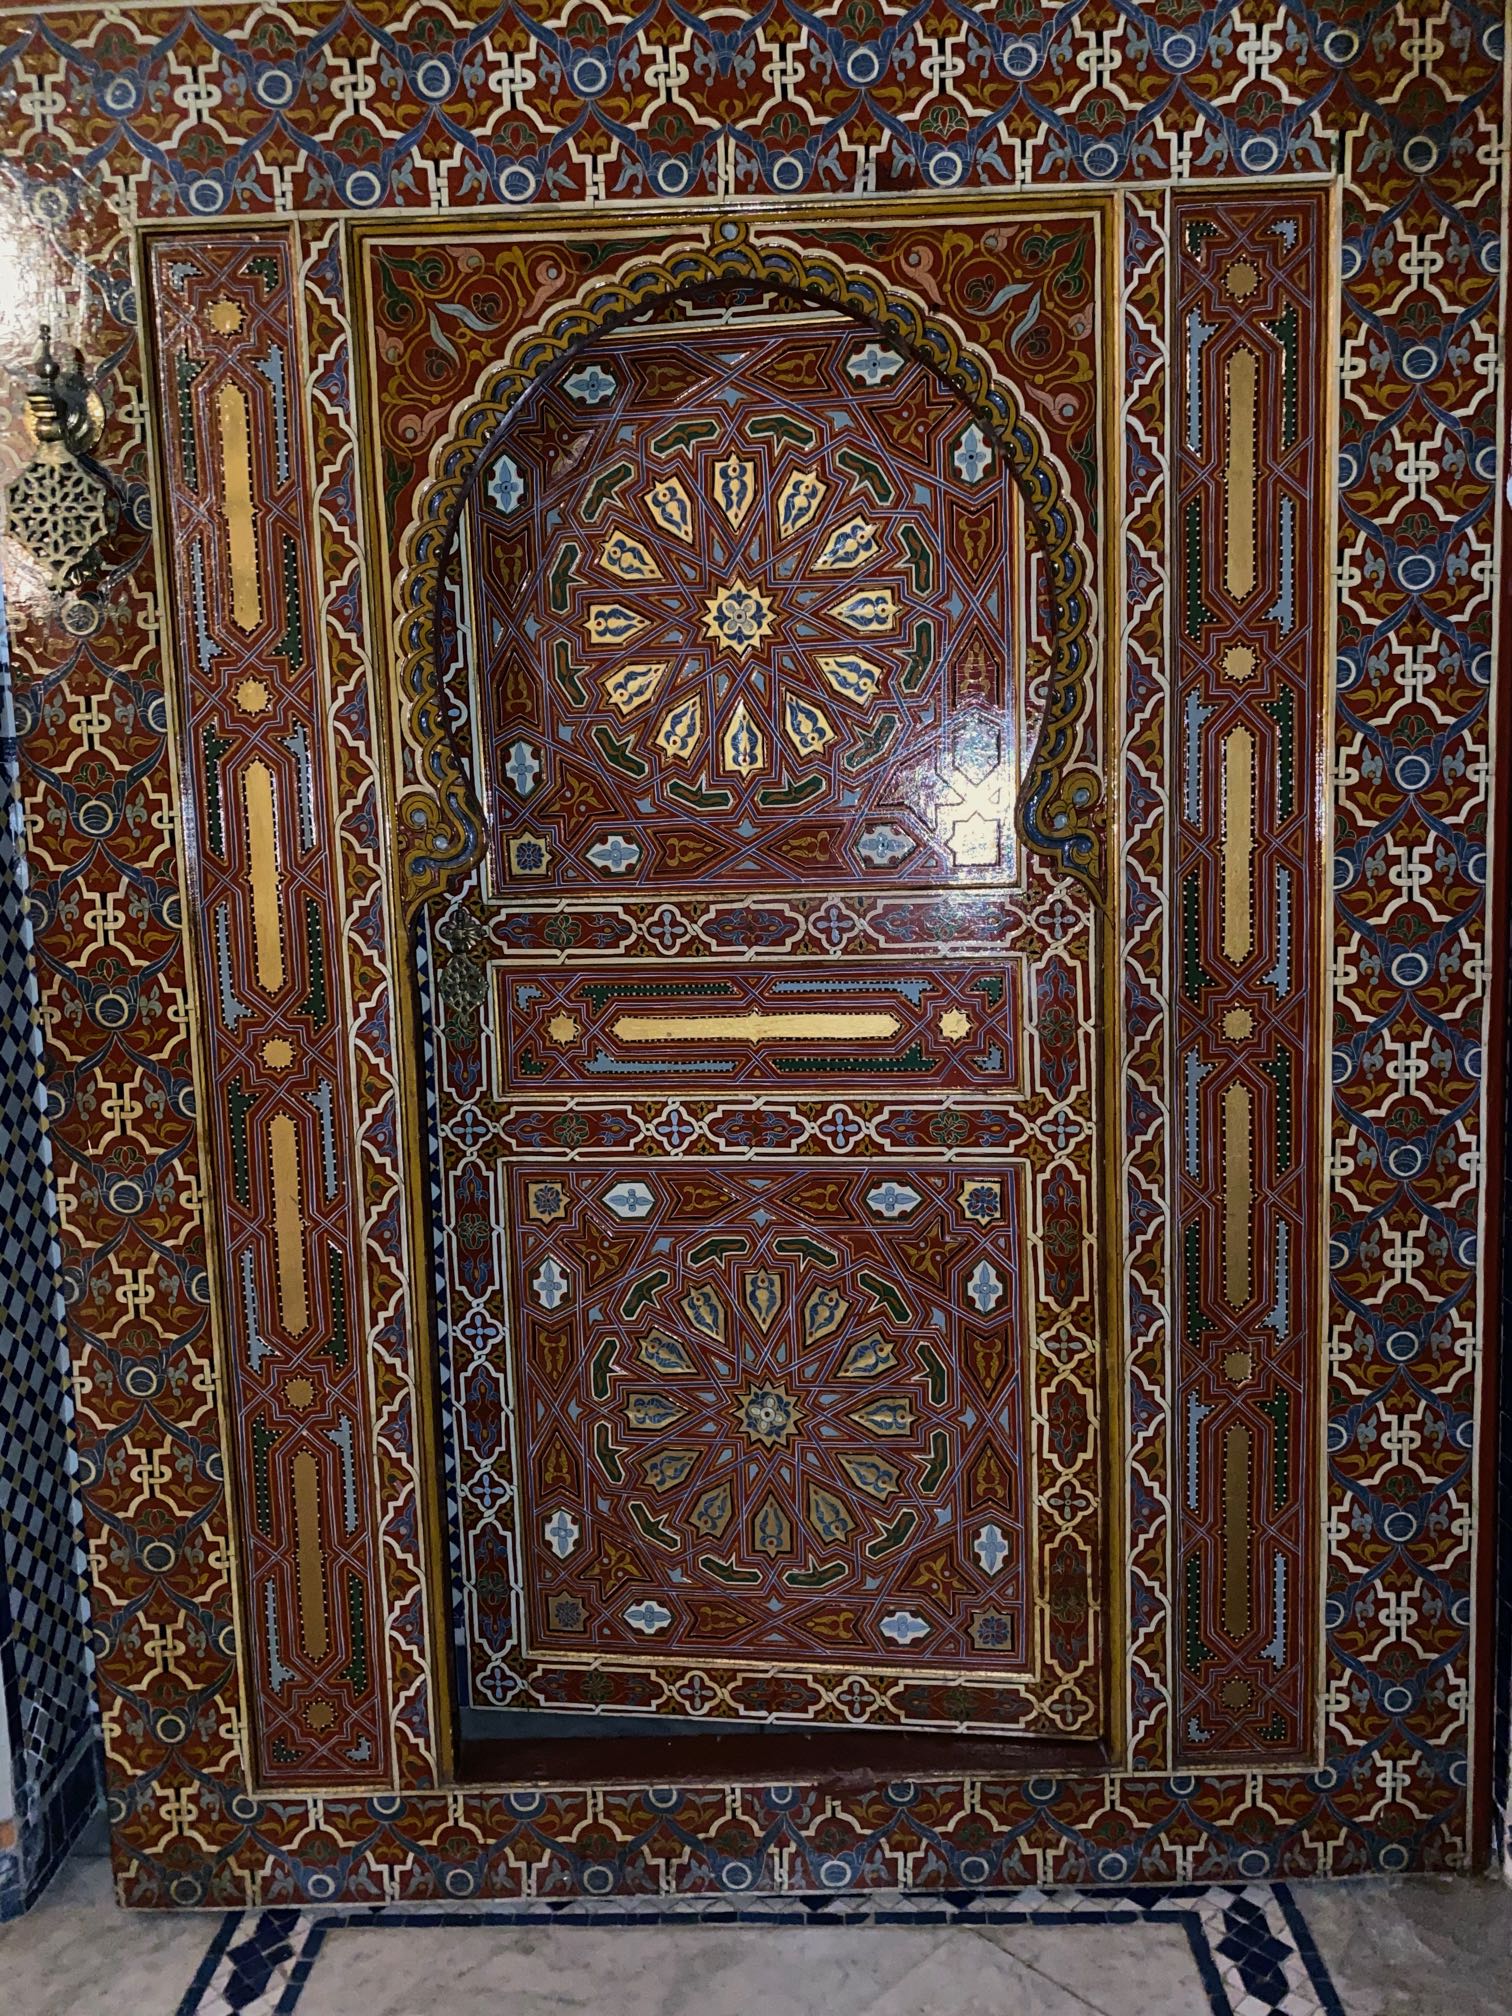 <p>Wooden door with elaborate geometric designs and floral motifs</p>